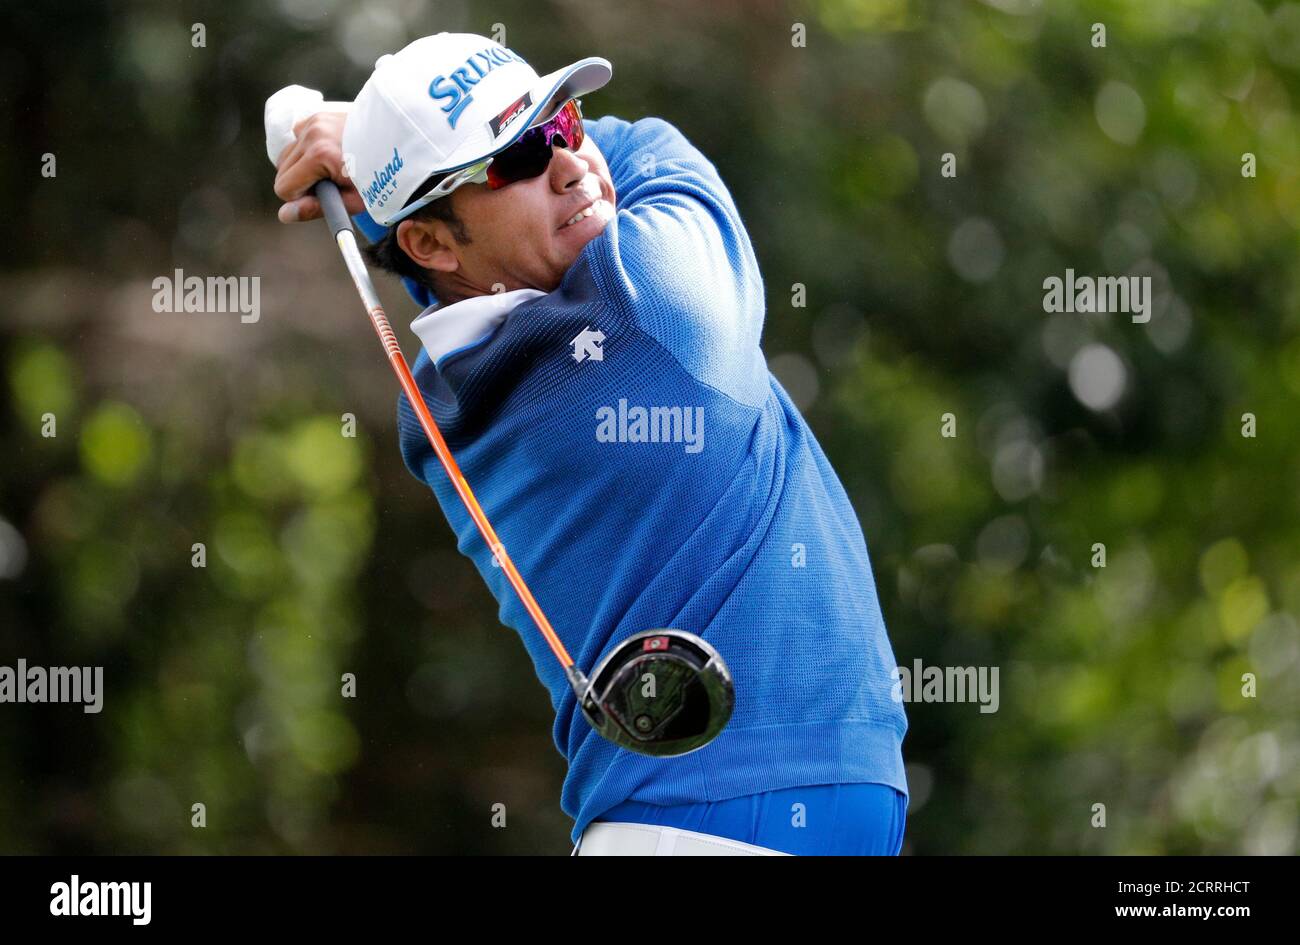 Hideki Matsuyama of Japan hits off the second tee in first round play during the 2017 Masters golf tournament at Augusta National Golf Club in Augusta, Georgia, U.S., April 6, 2017. REUTERS/Lucy Nicholson Foto de stock